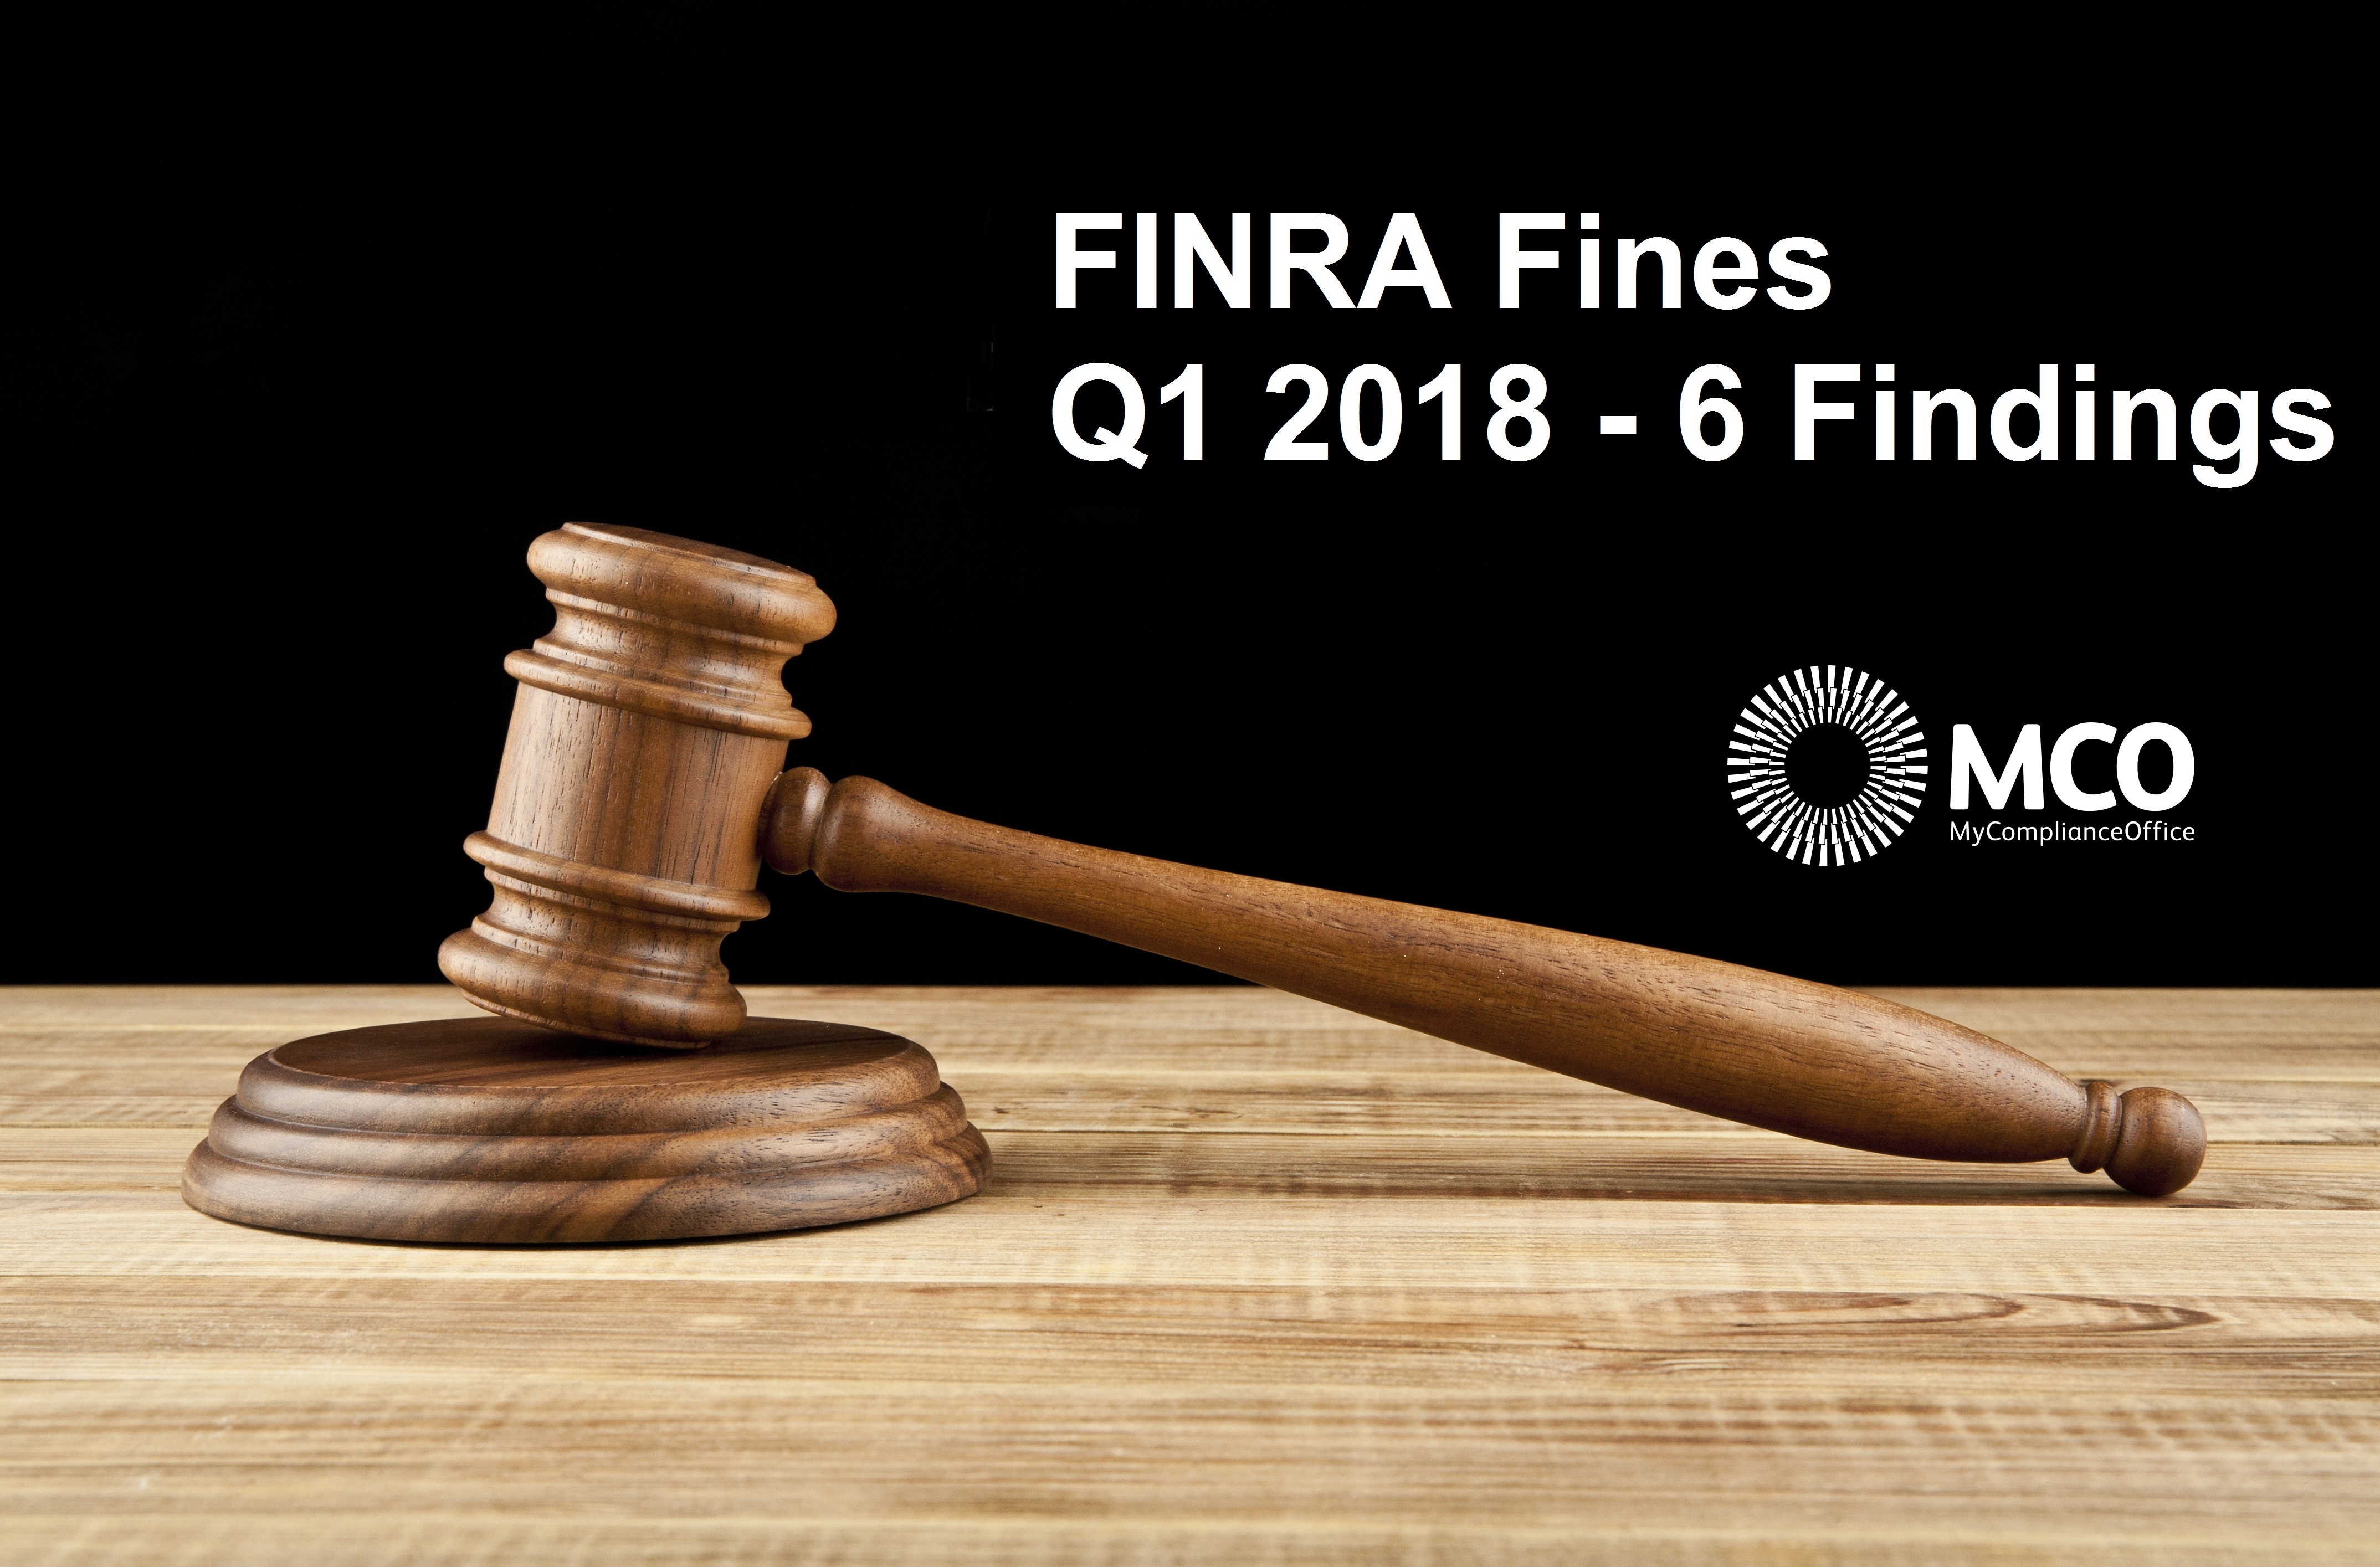 FINRA_Fines_2018-1